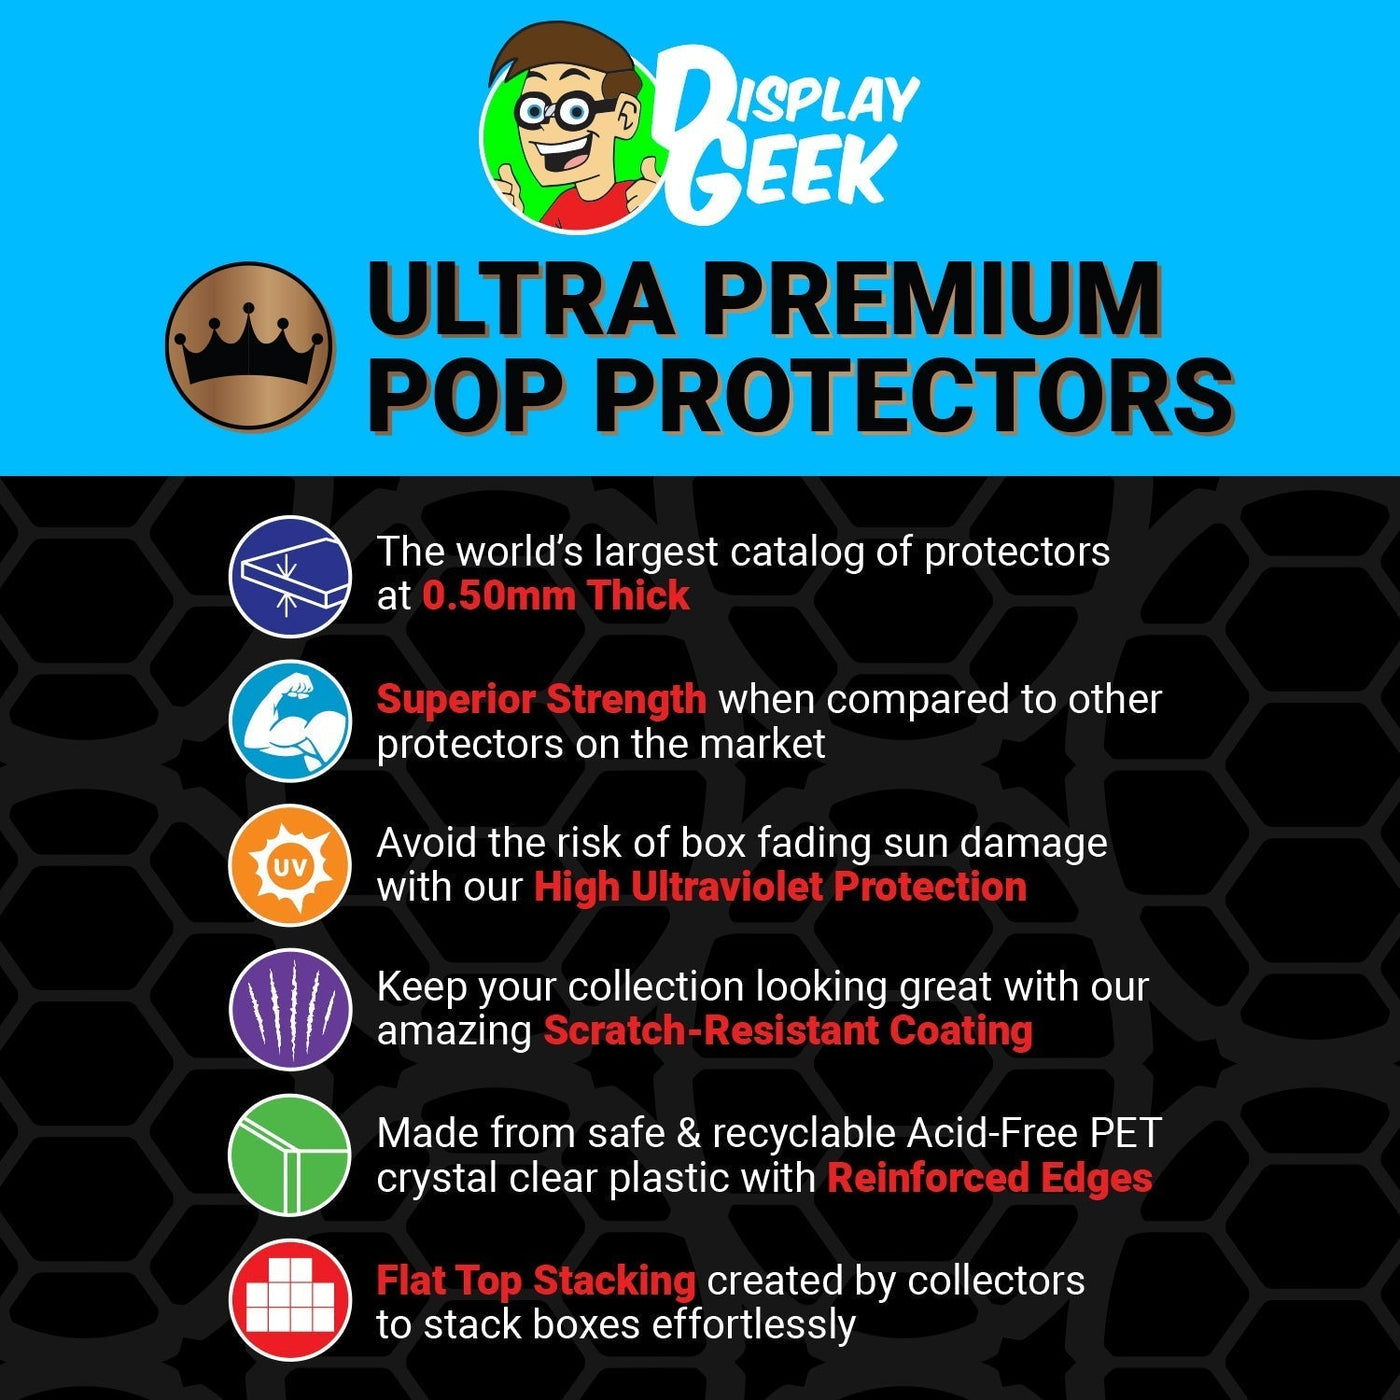 Pop Protector for 2 Pack Taran & Horned King SDCC Funko Pop on The Protector Guide App by Display Geek